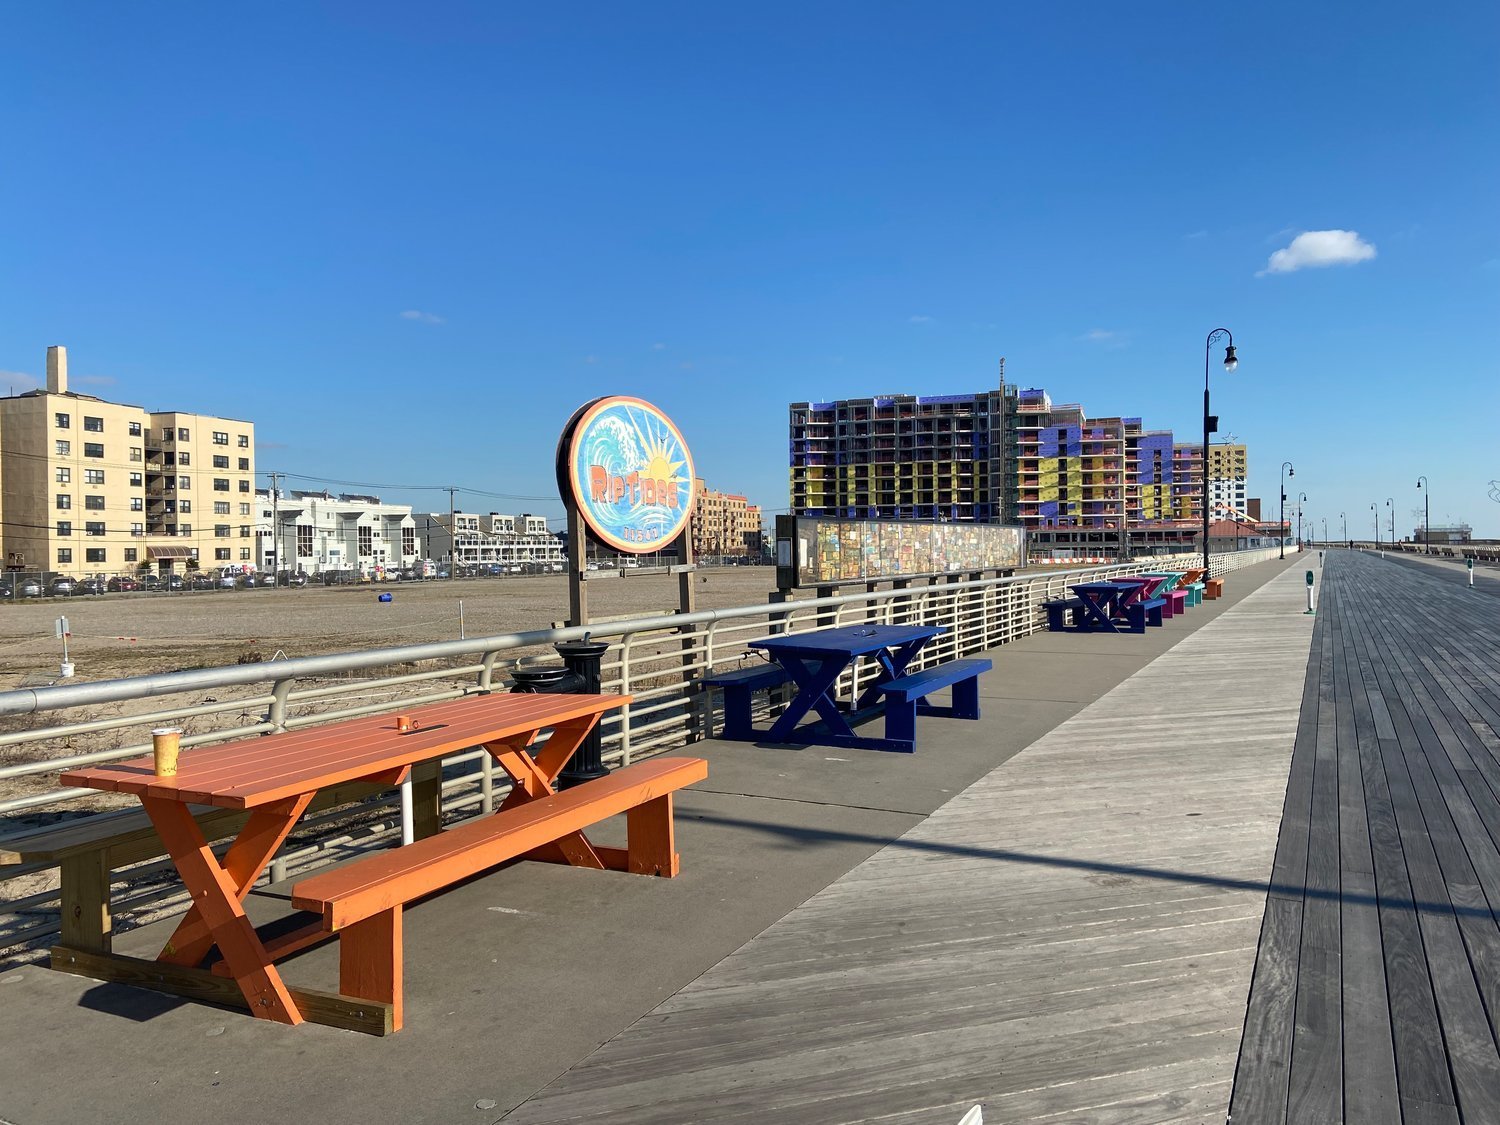 The Long Beach City Council voted 3-1 at Tuesday night’s meeting to approve new dates for tables on the boardwalk. Councilman Roy Lester cast the only no vote.